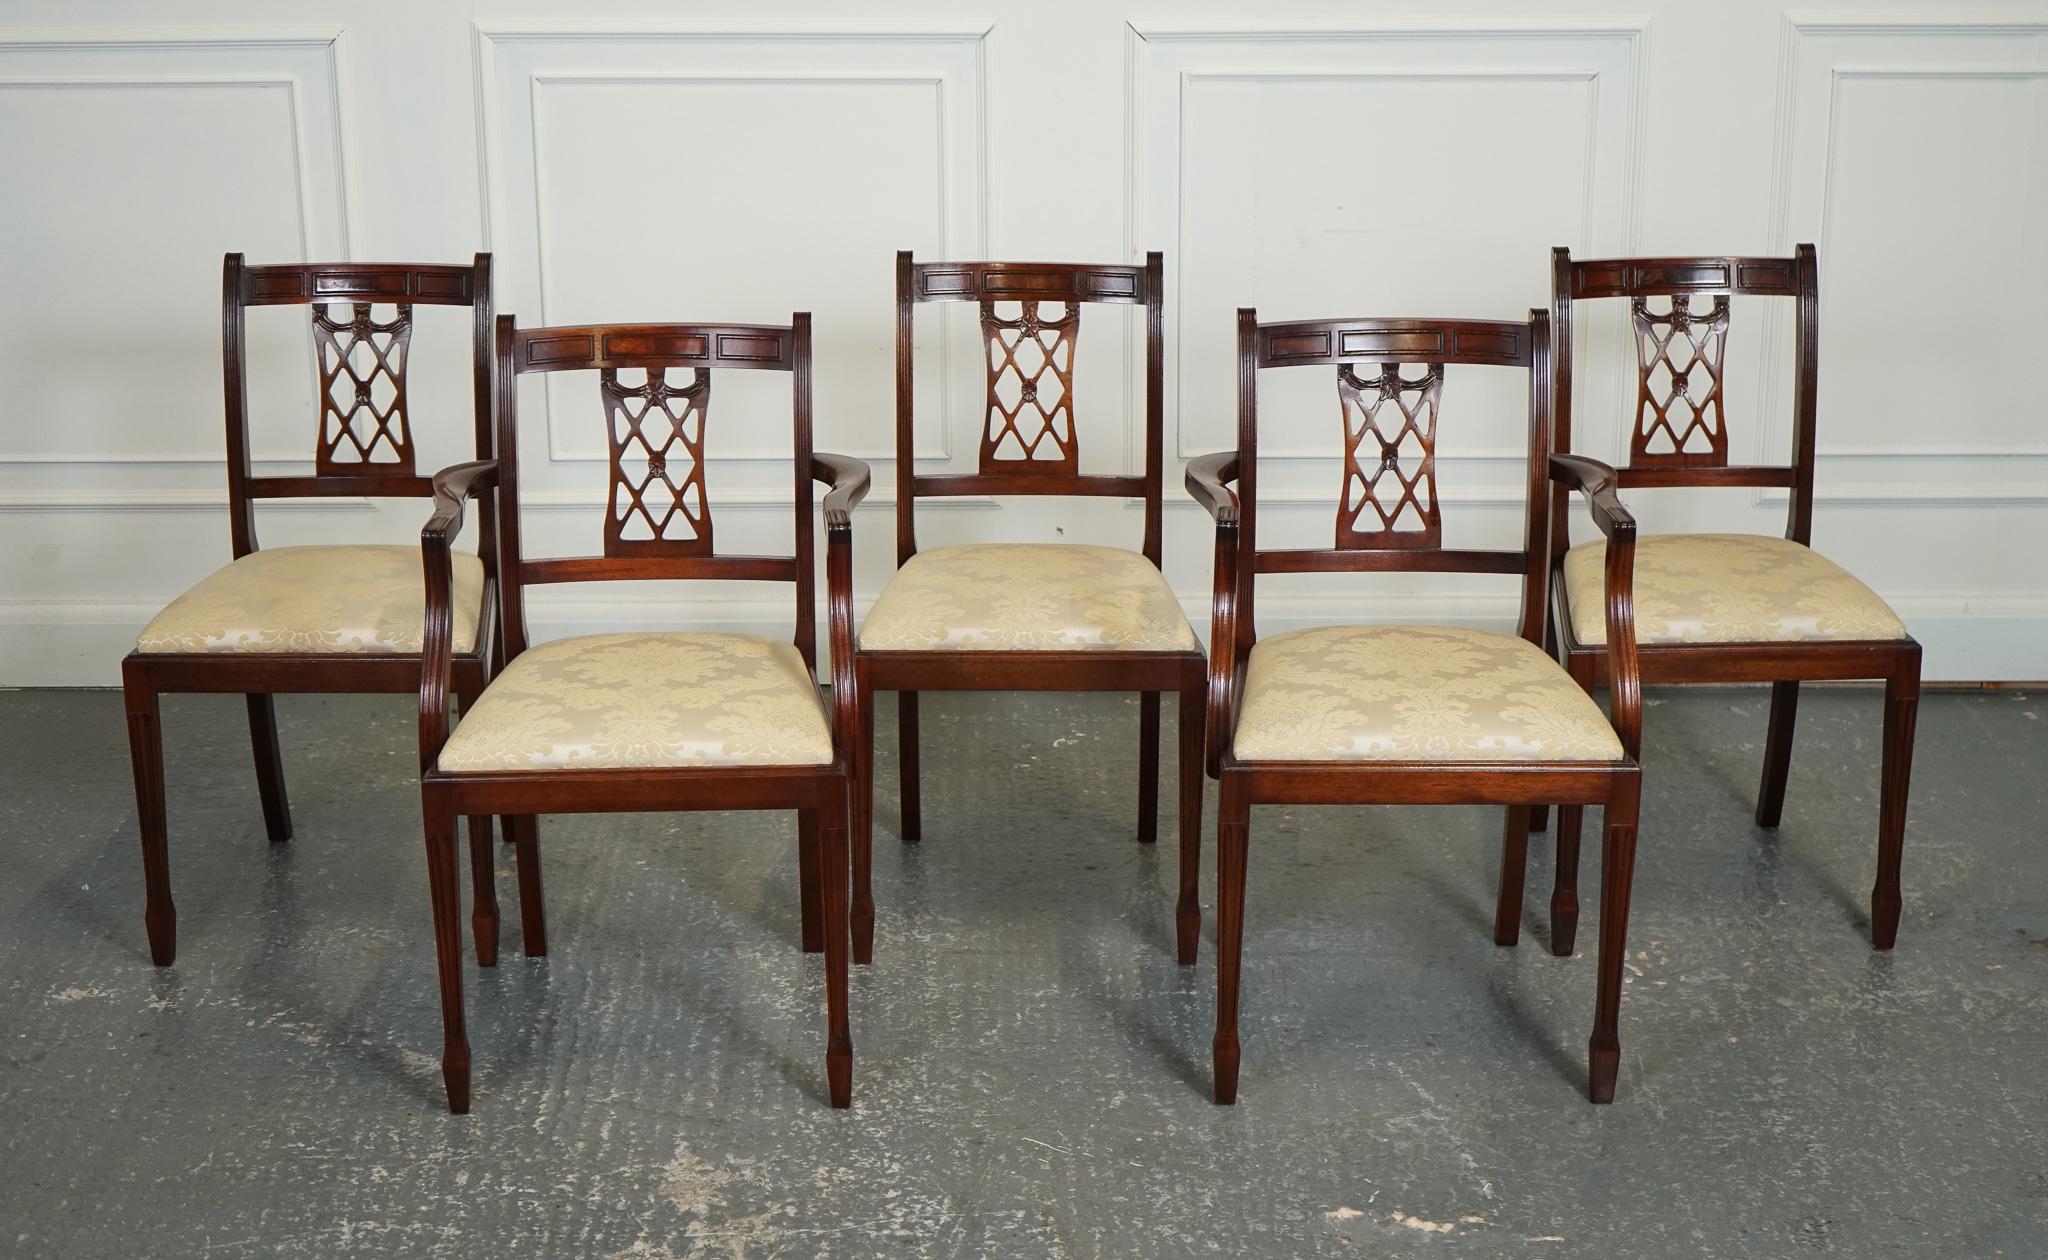 We are delighted to offer for sale these Bevan Funnell Hepplewhite Style Dining Chairs.

The Hepplewhite style Bevan Funnell set of 5 dining chairs is a stunning addition to any dining room. Inspired by the iconic designs of George Hepplewhite,